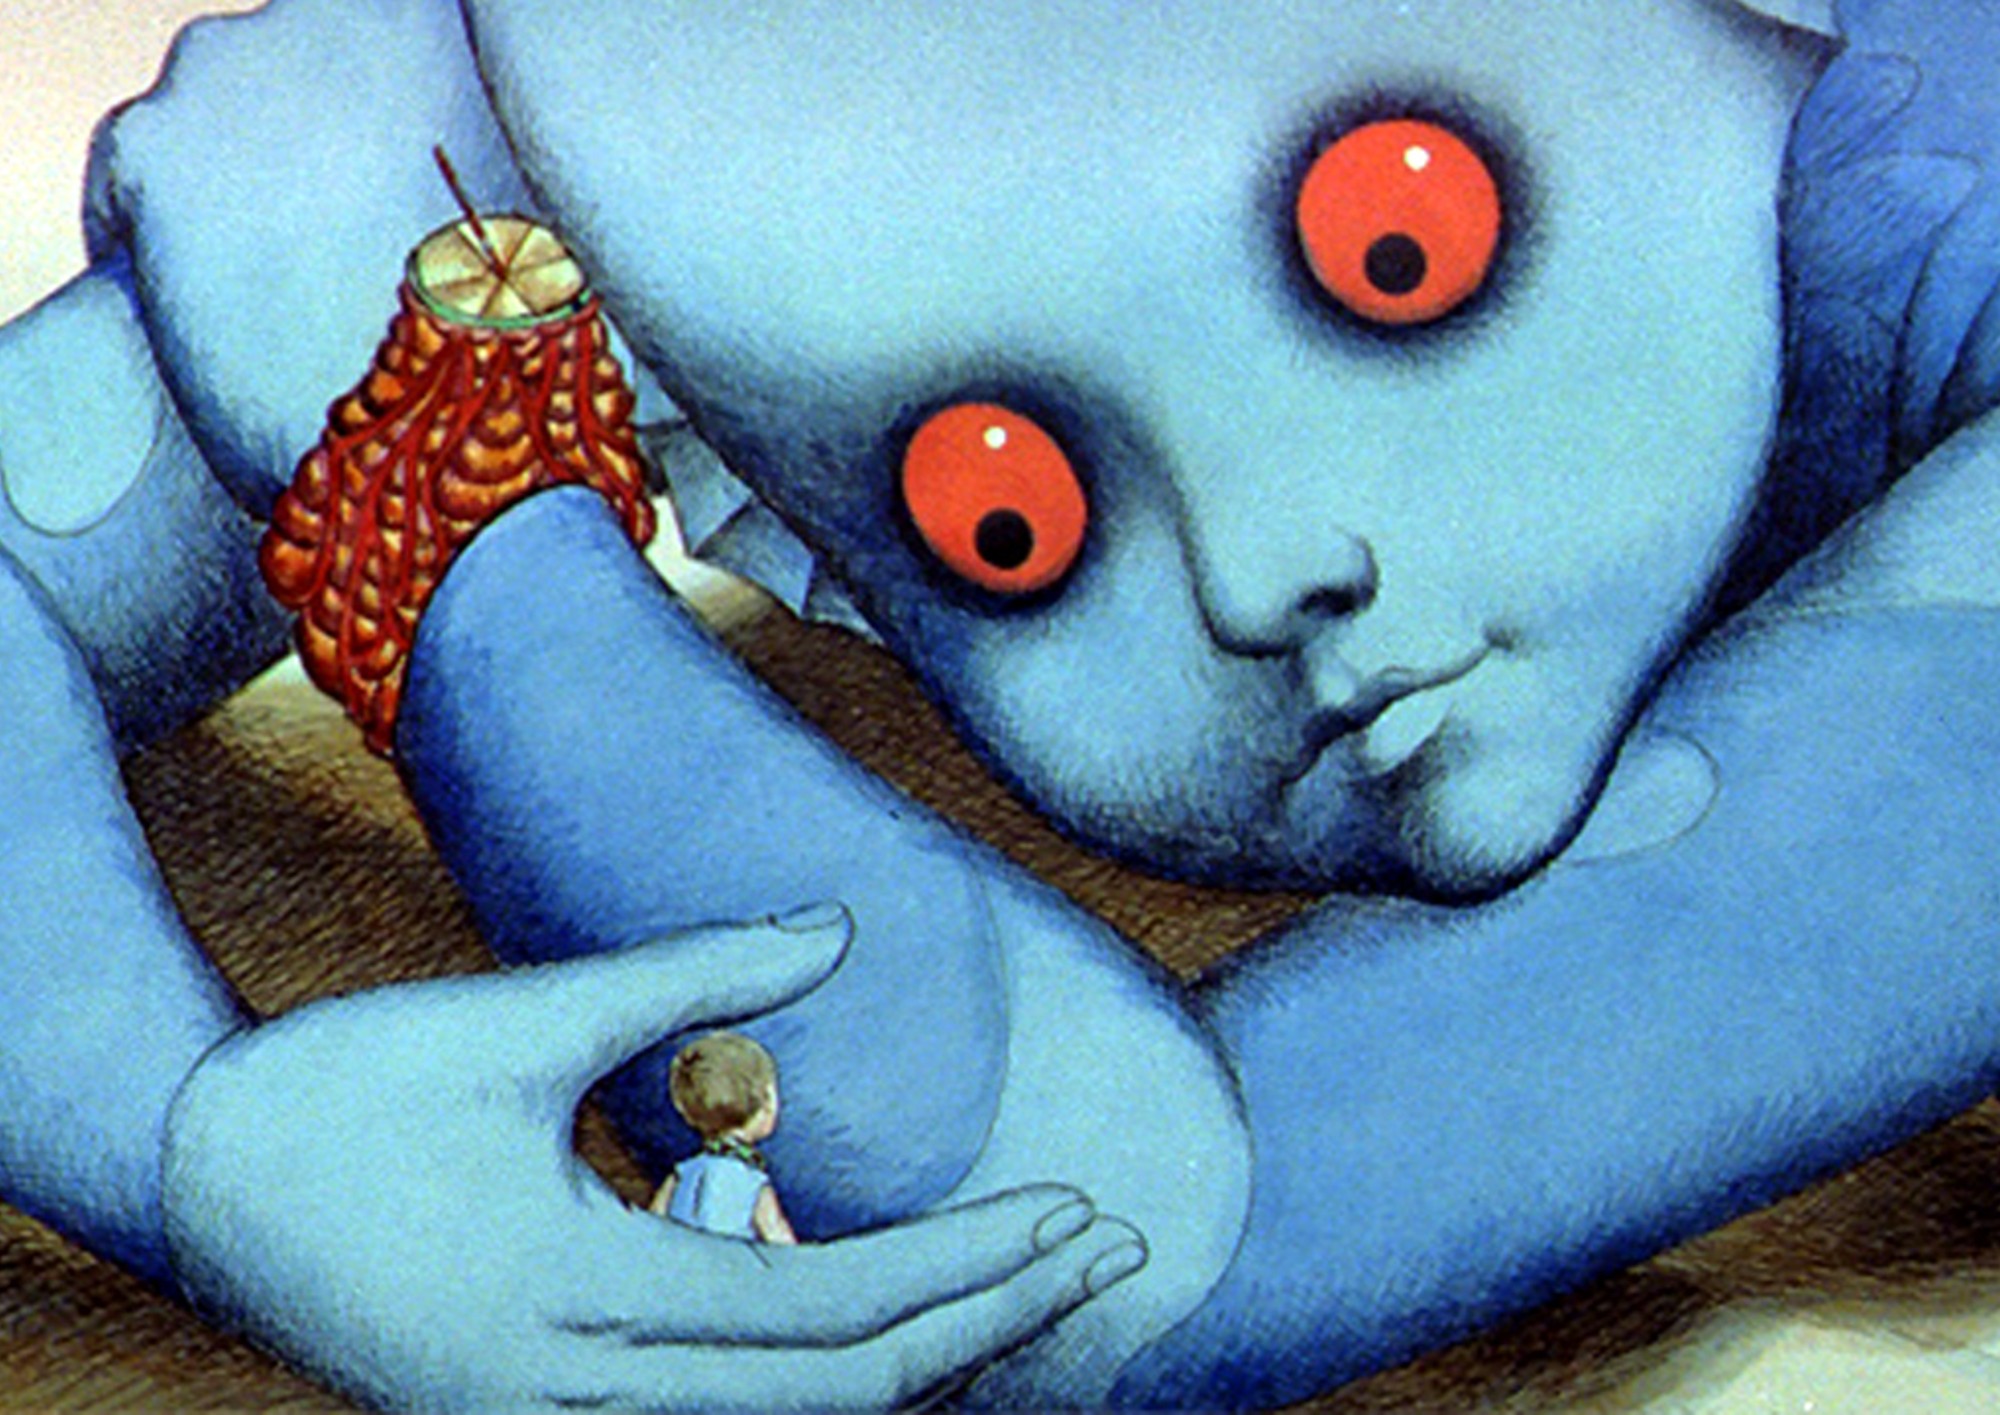 Image from the motion picture Fantastic Planet